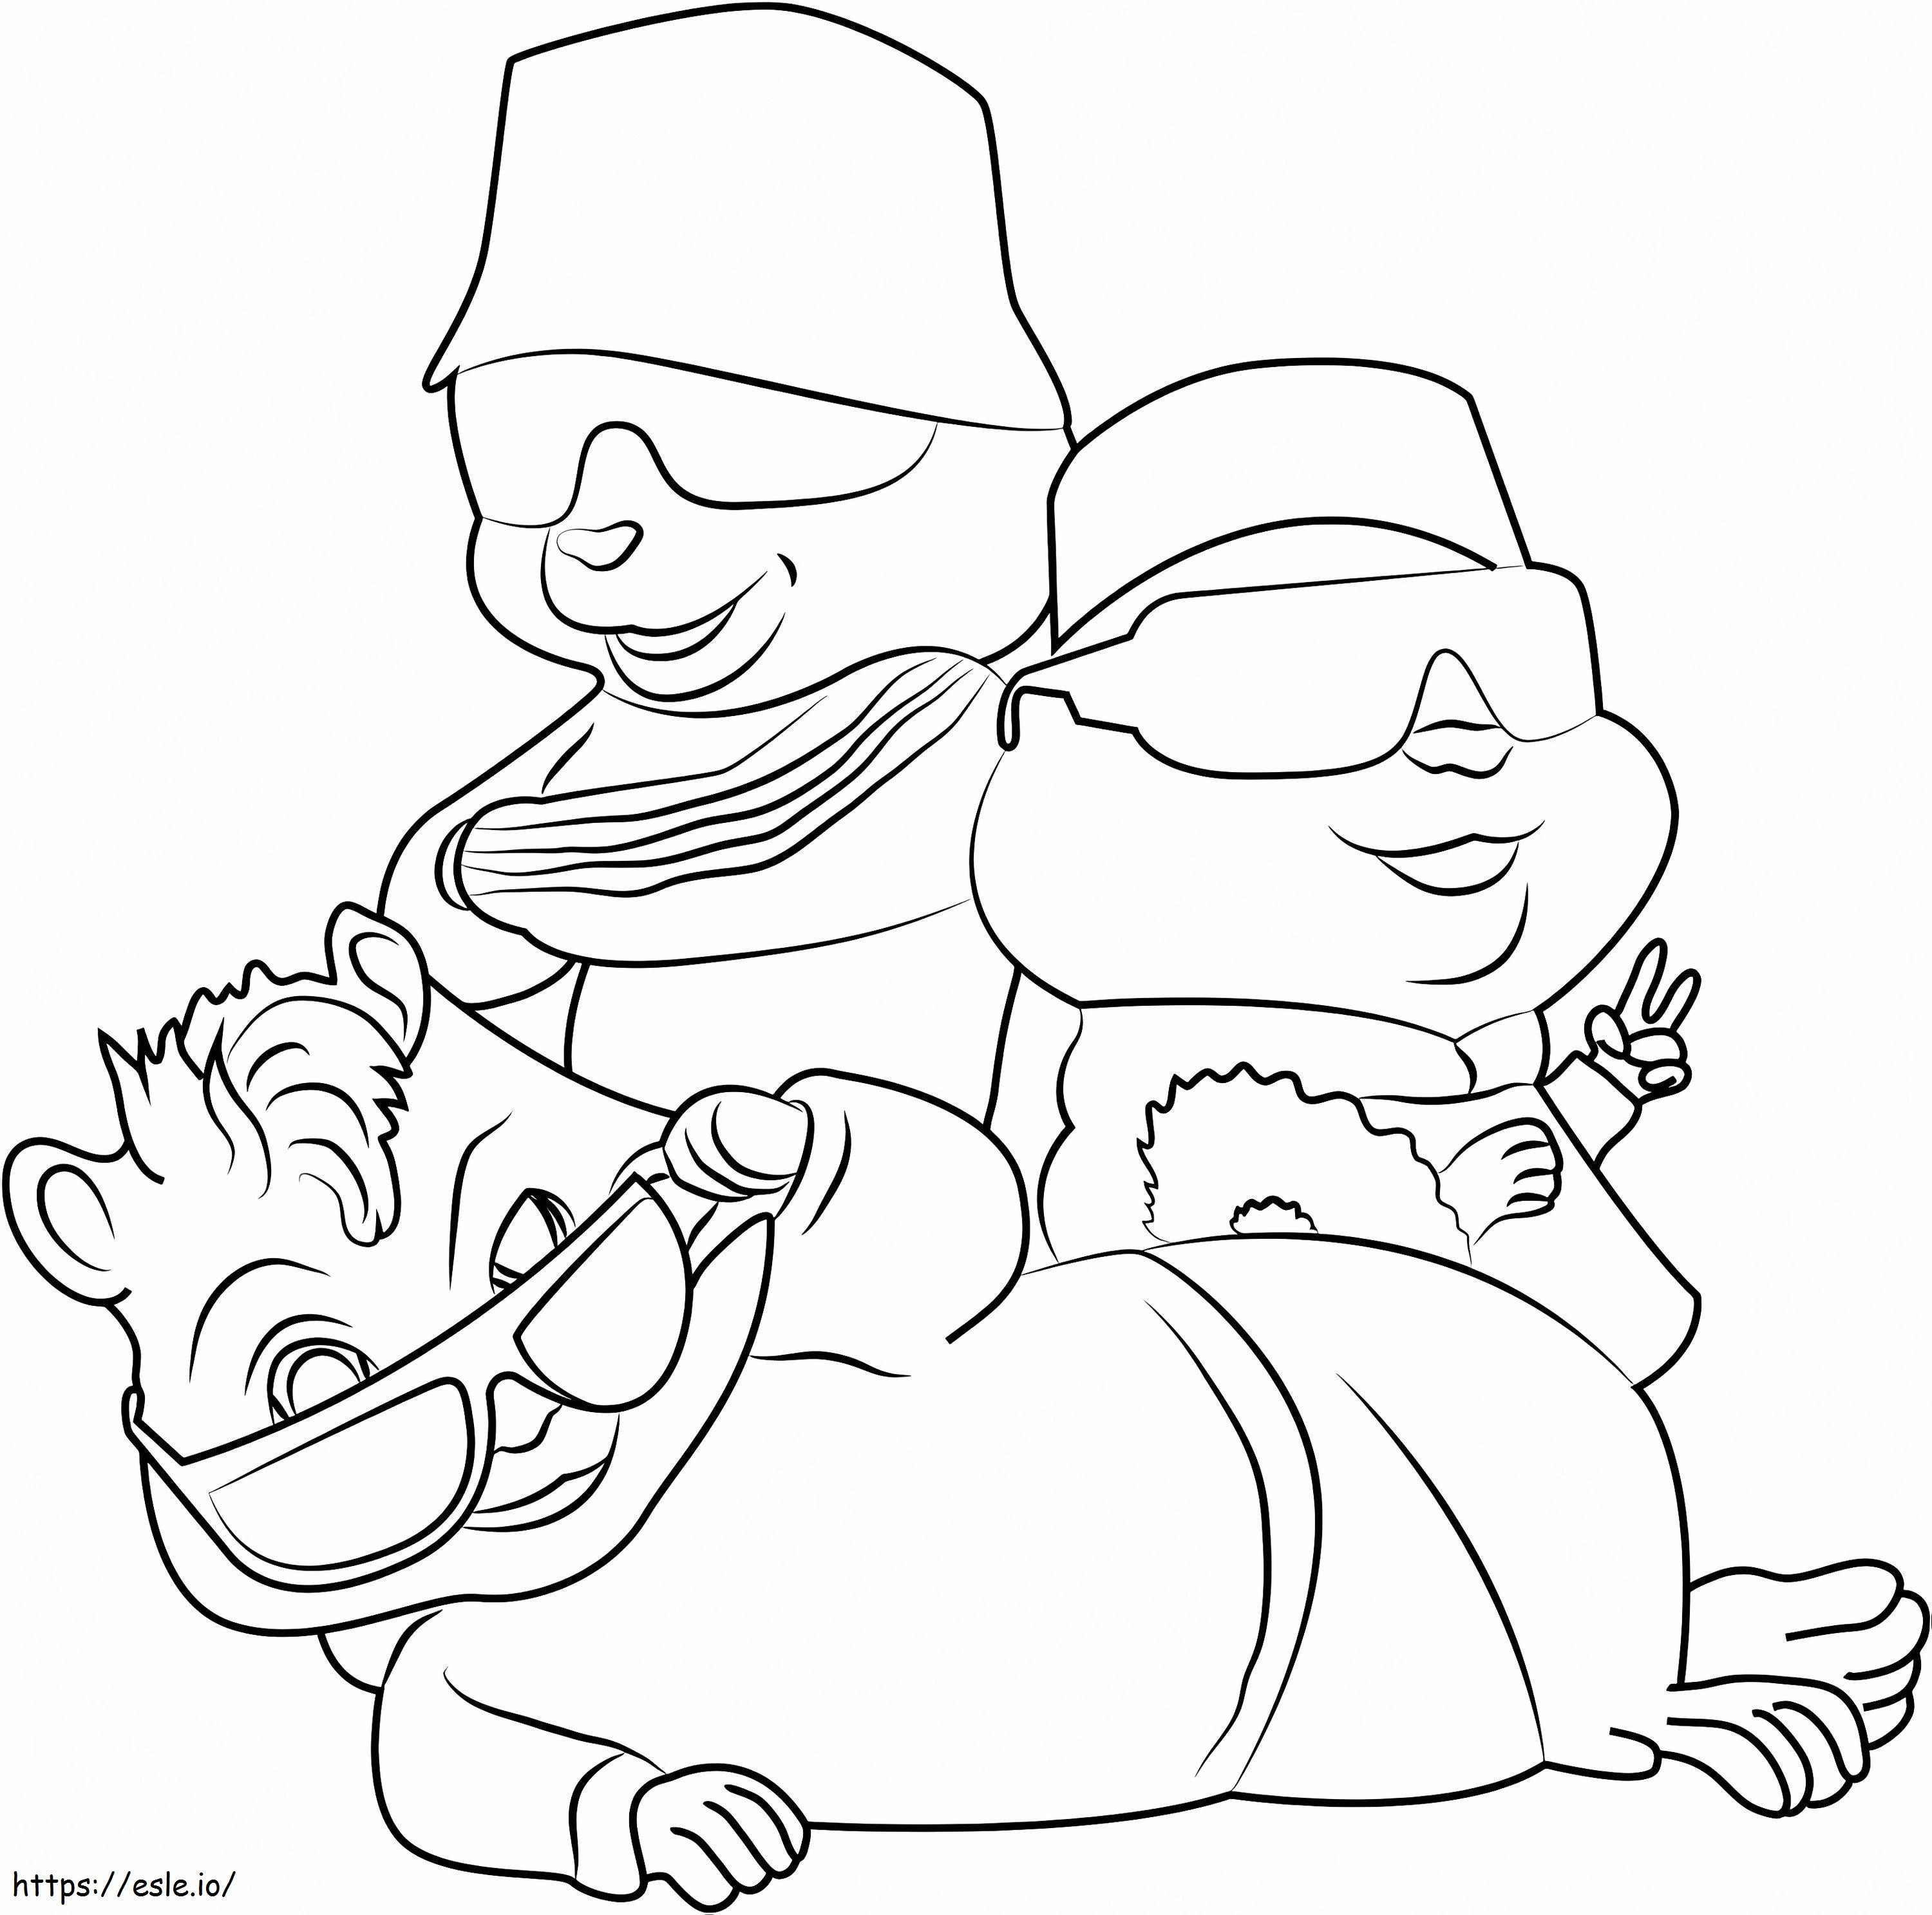 The Squeakquel A4 coloring page